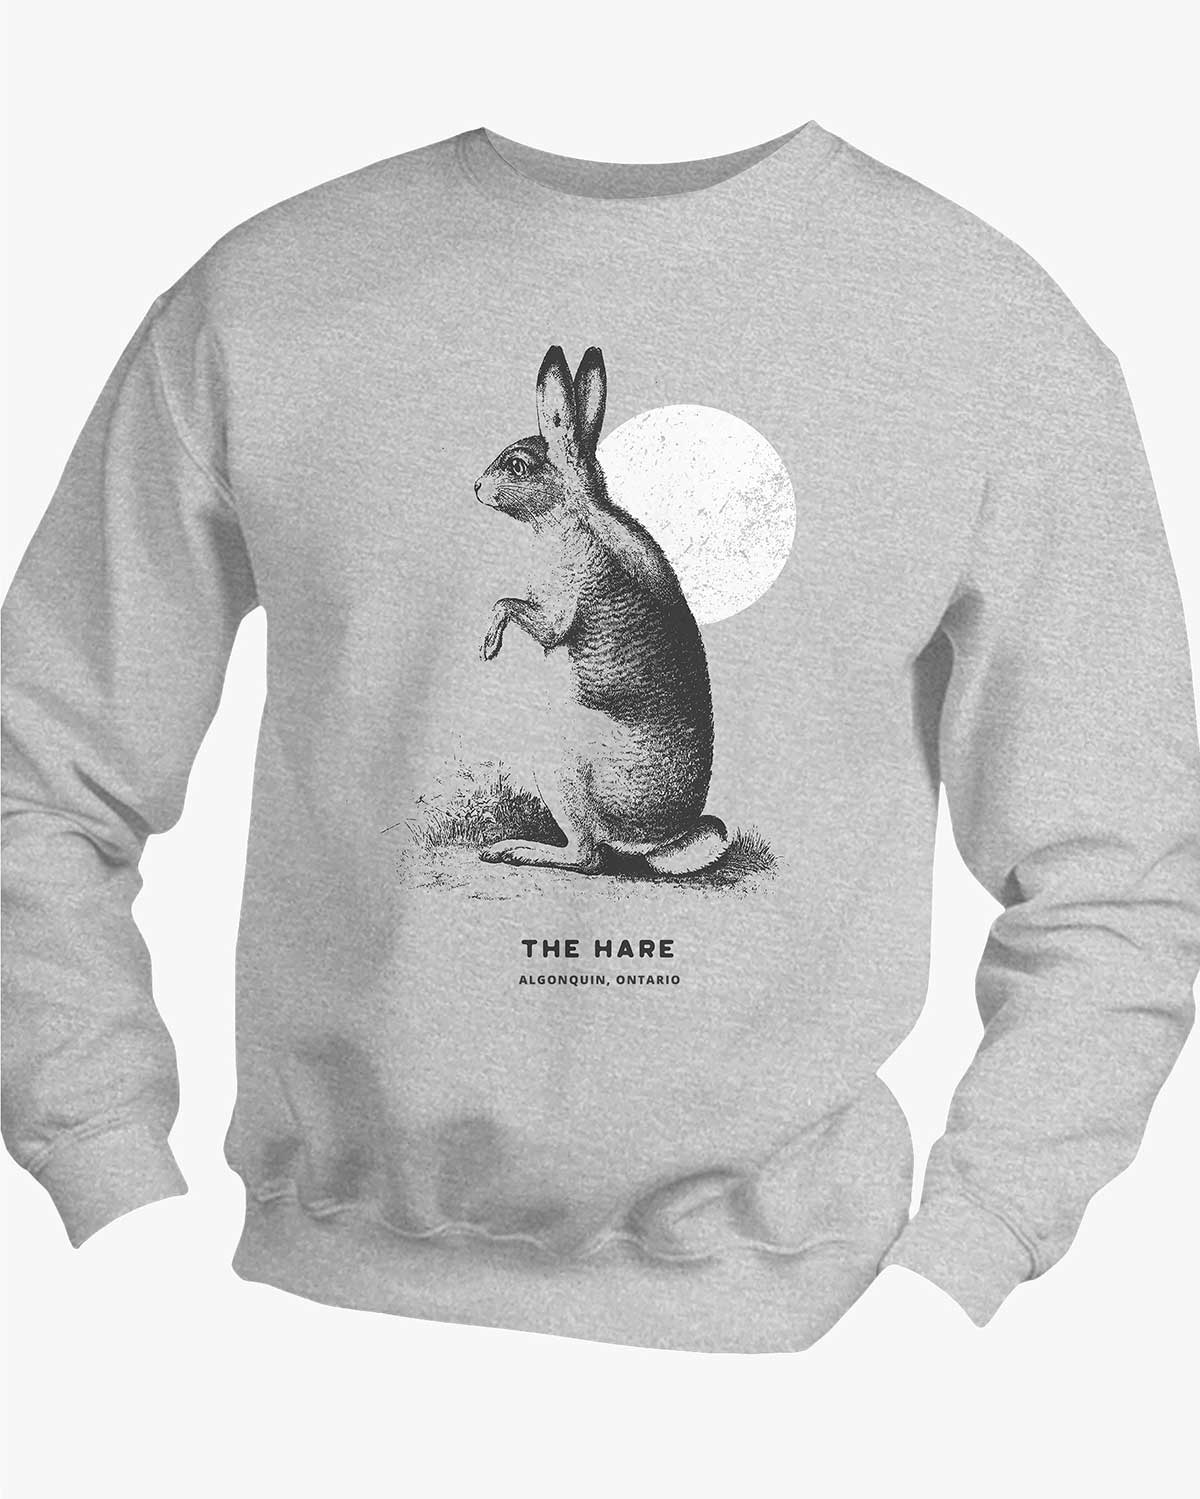 The Hare - Algonquin - Sweater